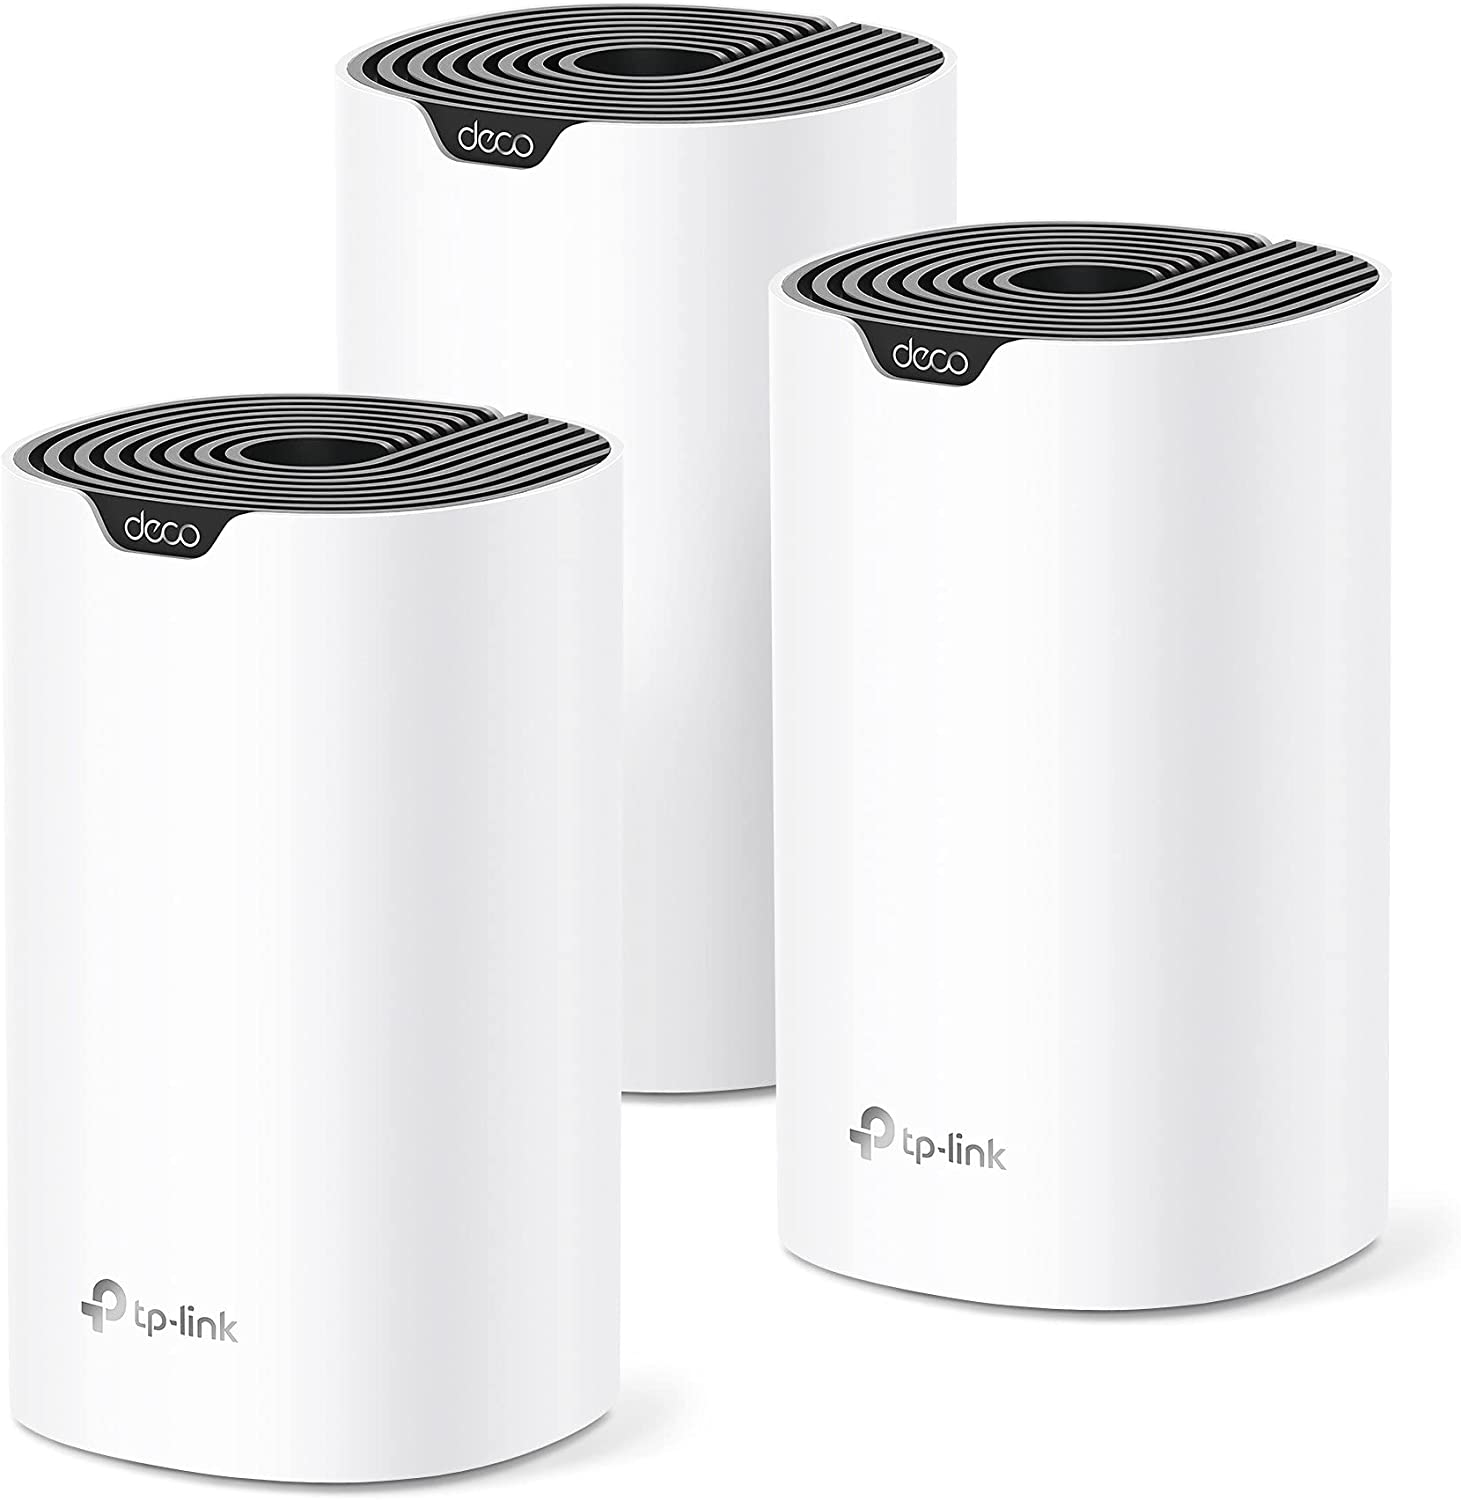 Best mesh WiFi deal: Get a TP-Link router/extender for 28% off